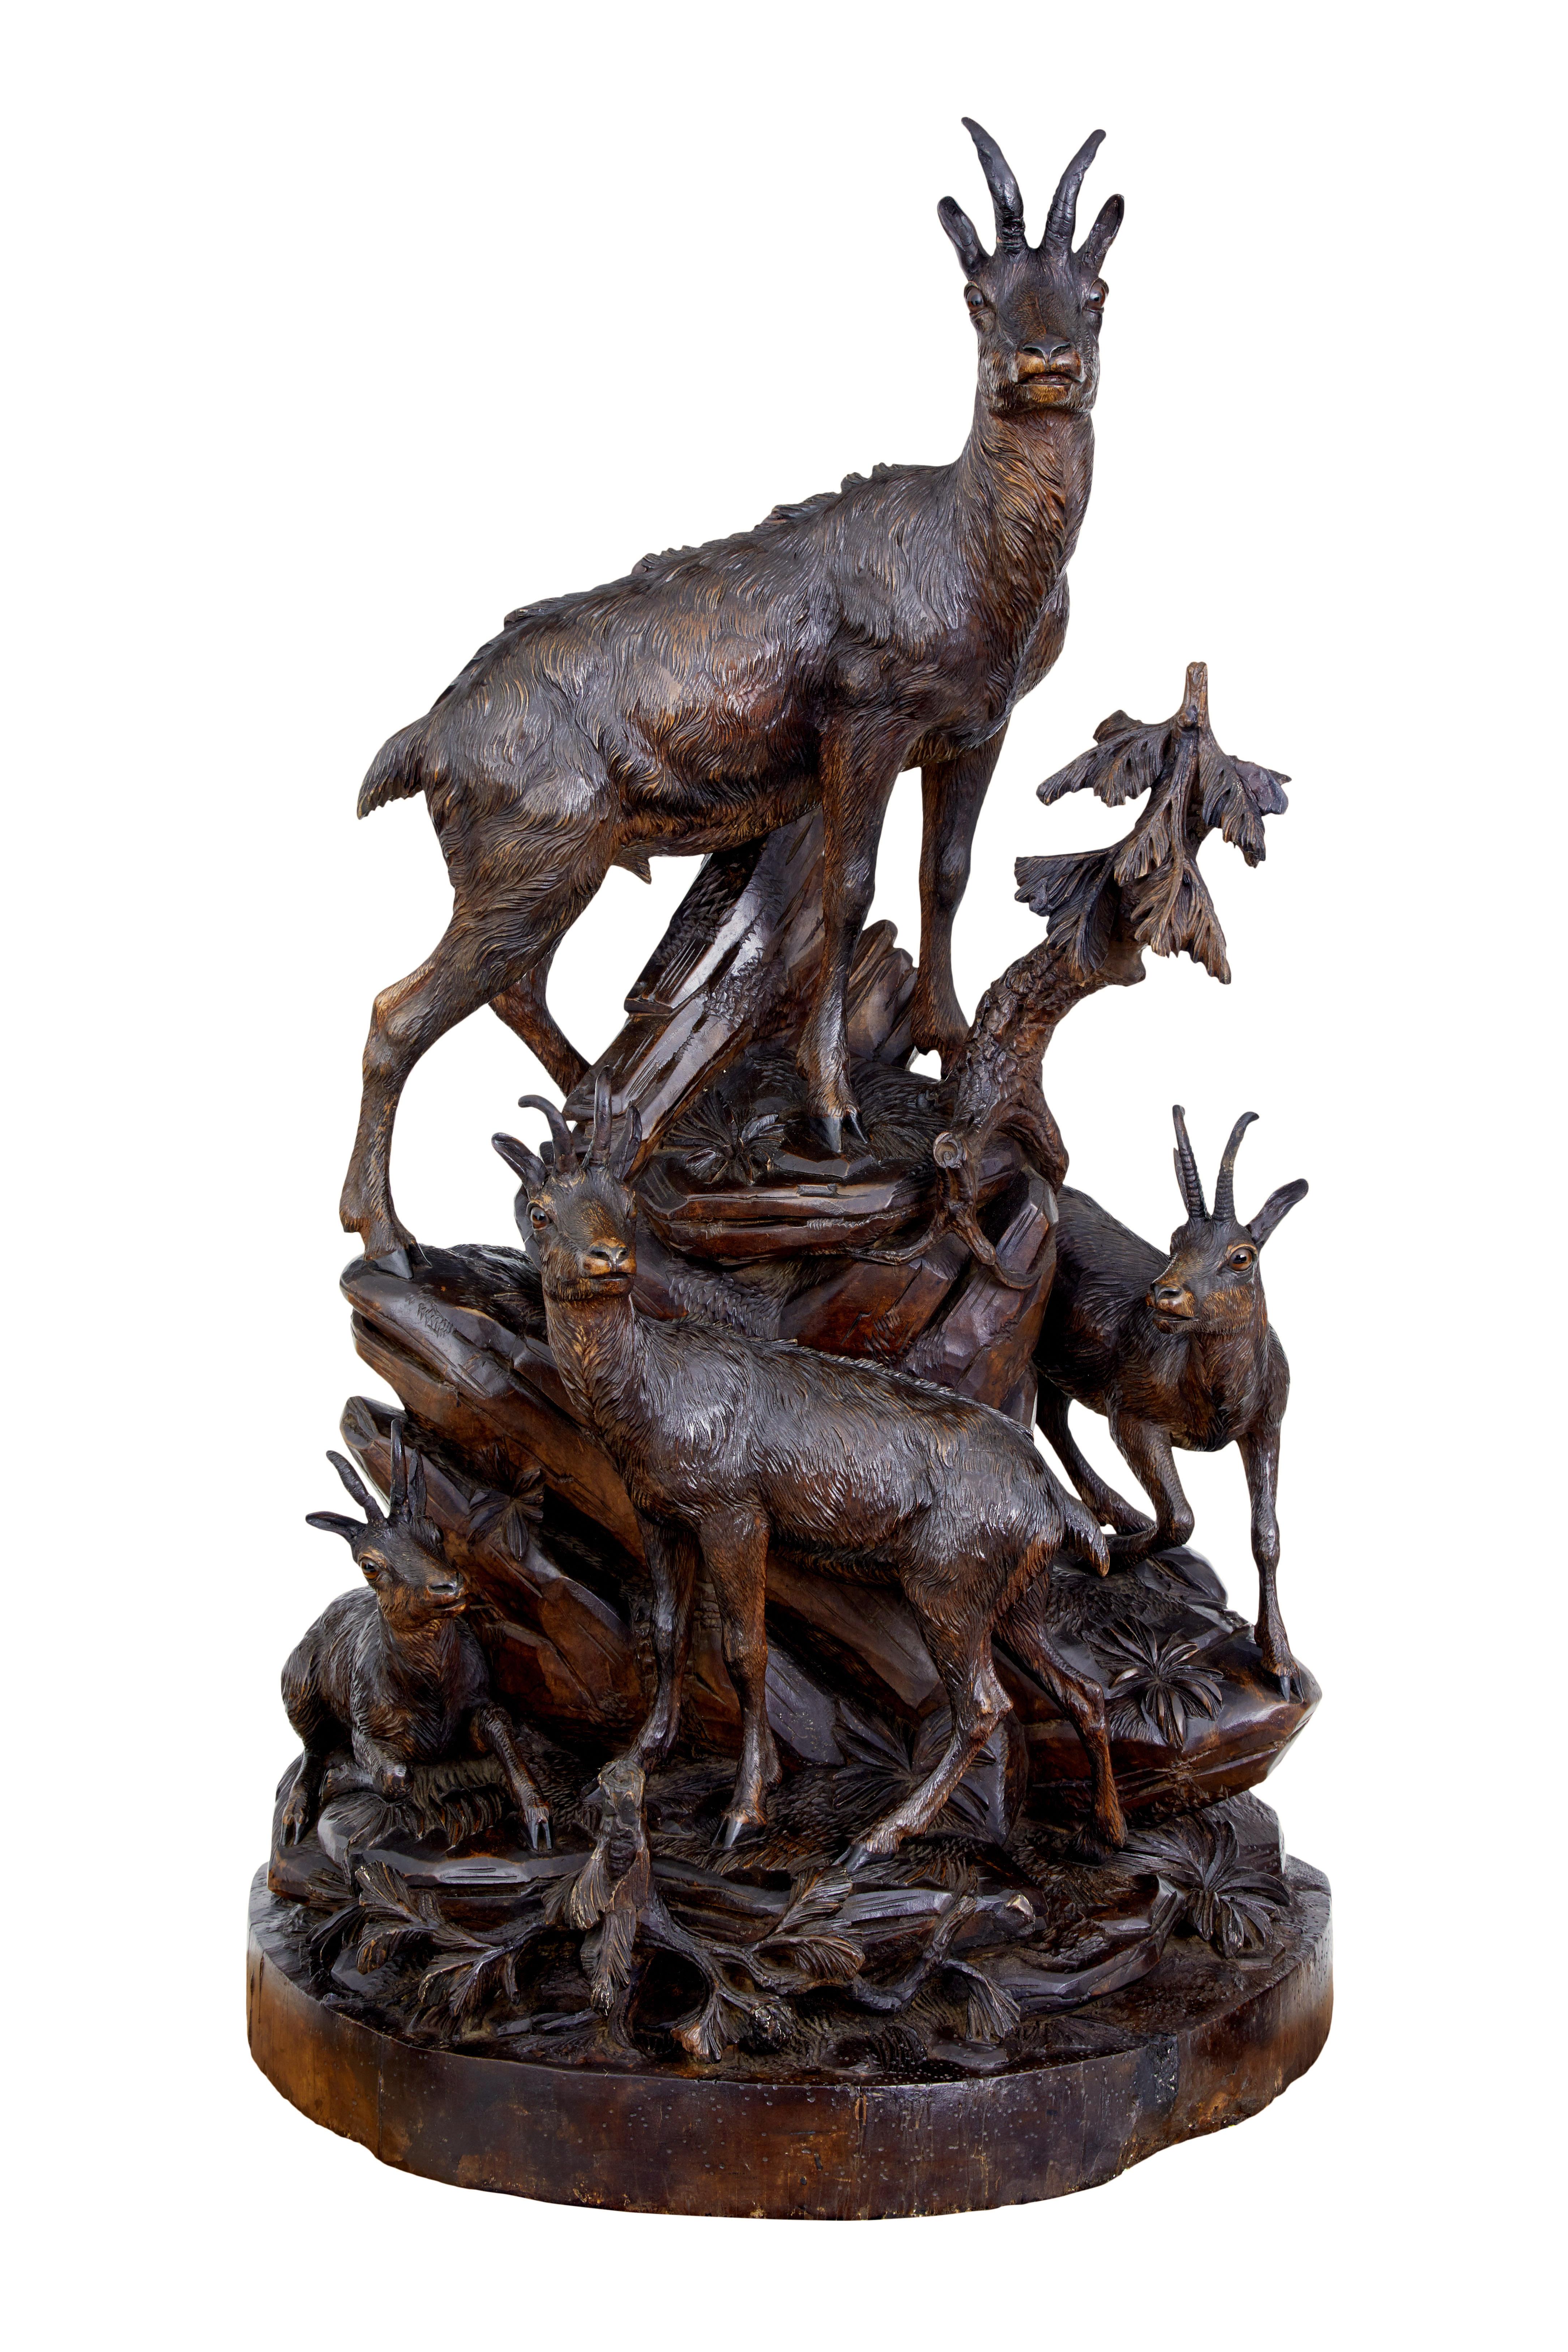 Fantastic black forest carving on impressive proportions circa 1890.

Features 4 european ibex of varying age and scale standing on carved rocks and foliage.  We have owned many black forest sculptures but none of this scale and detail.

Original